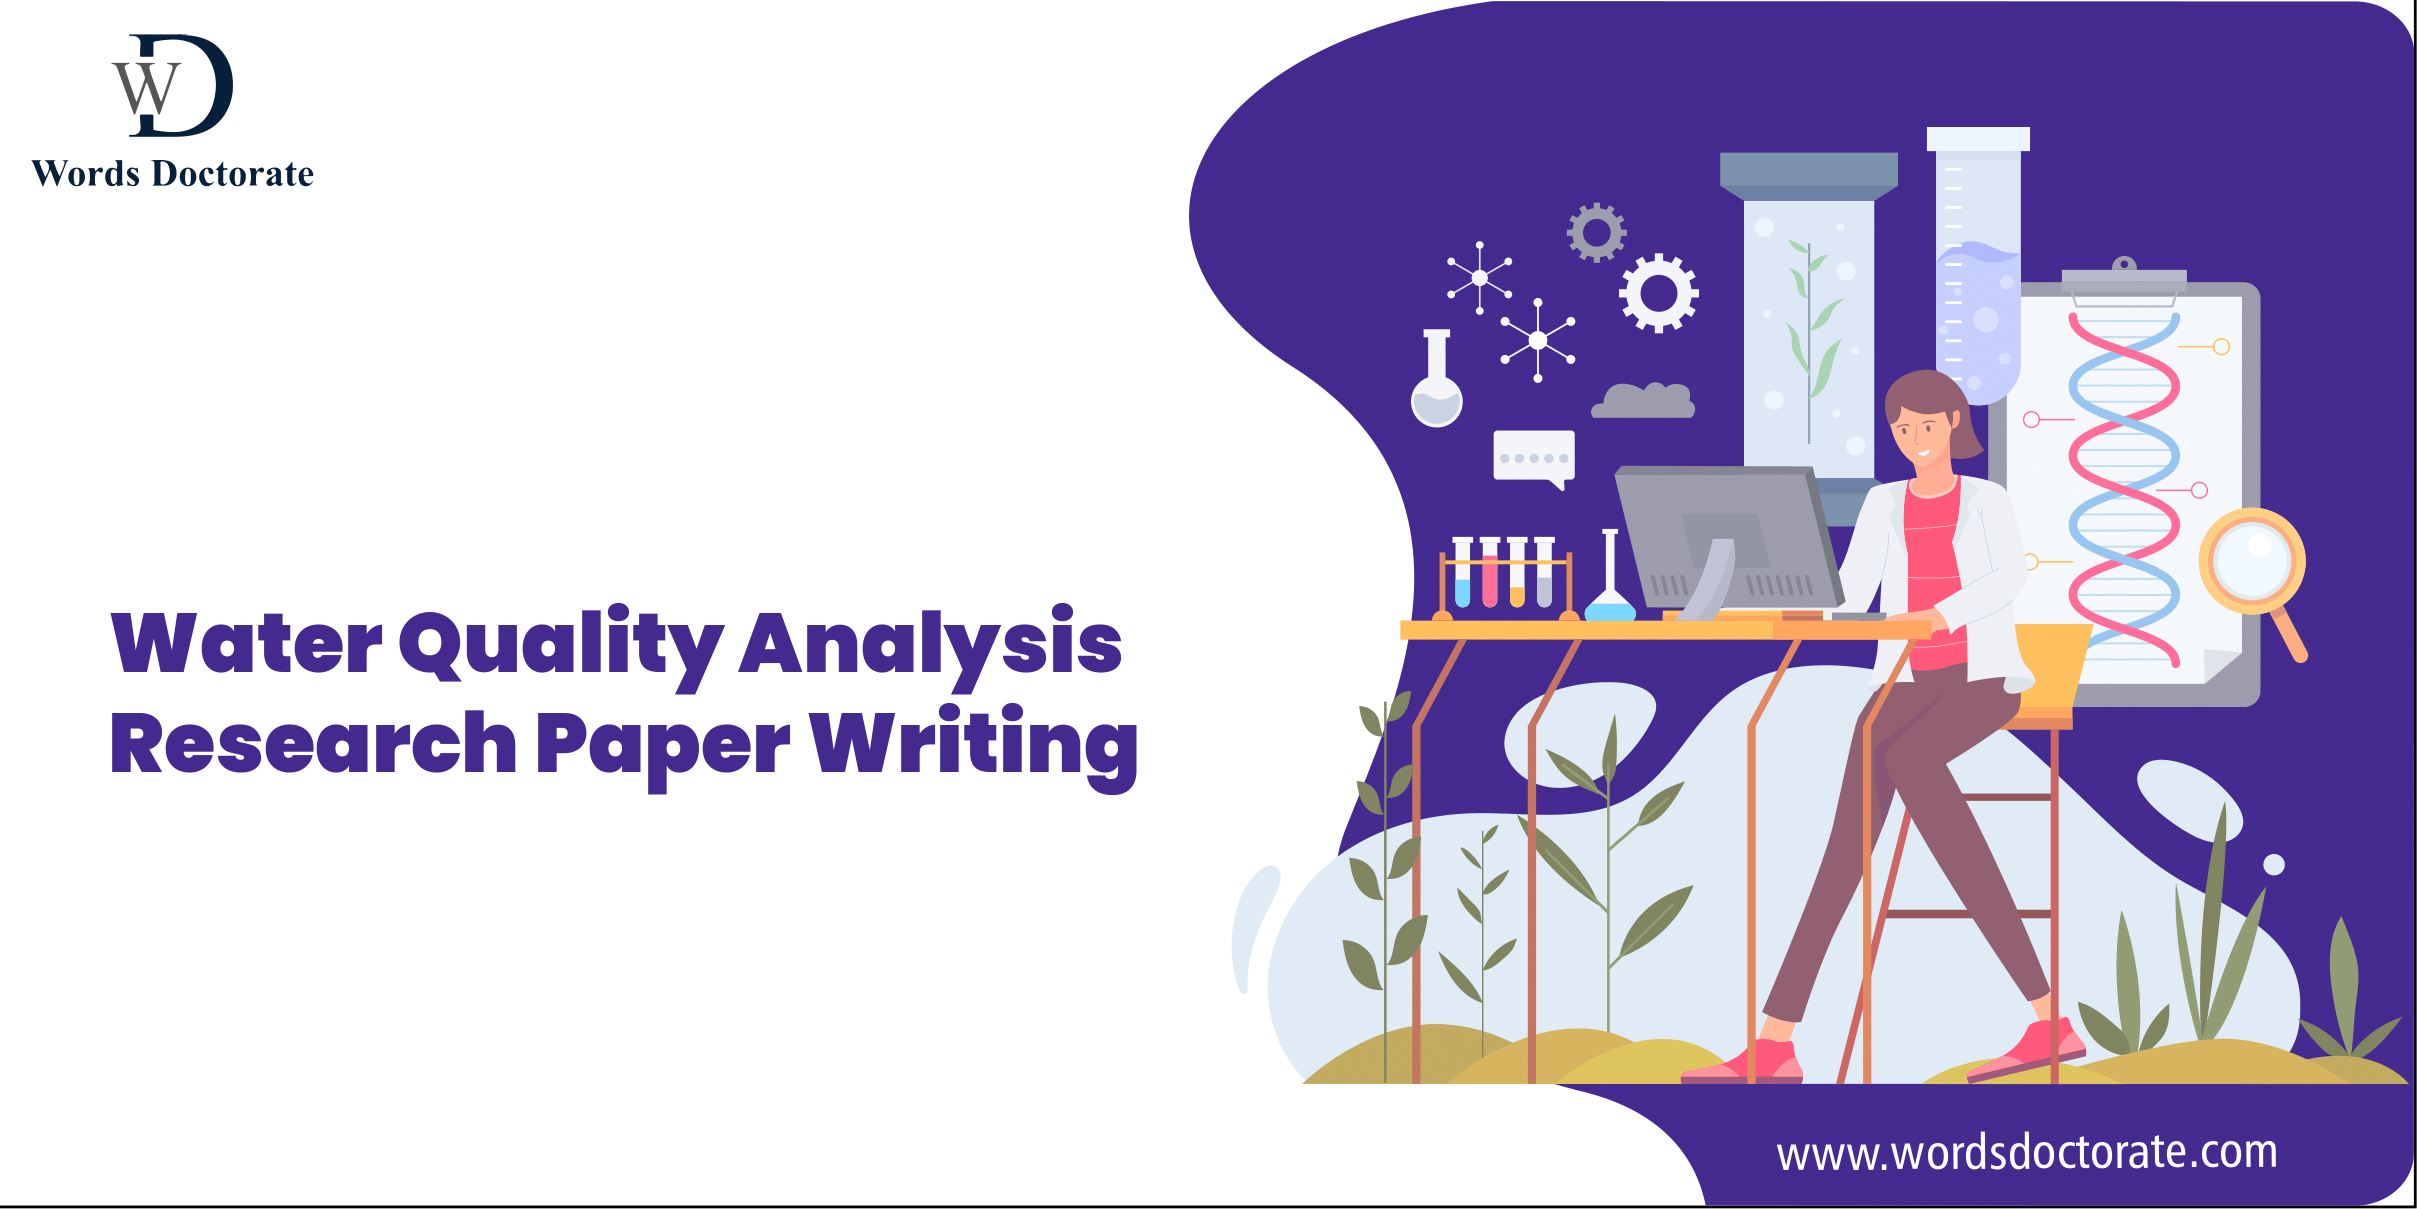 Water Quality Analysis Research Paper Writing